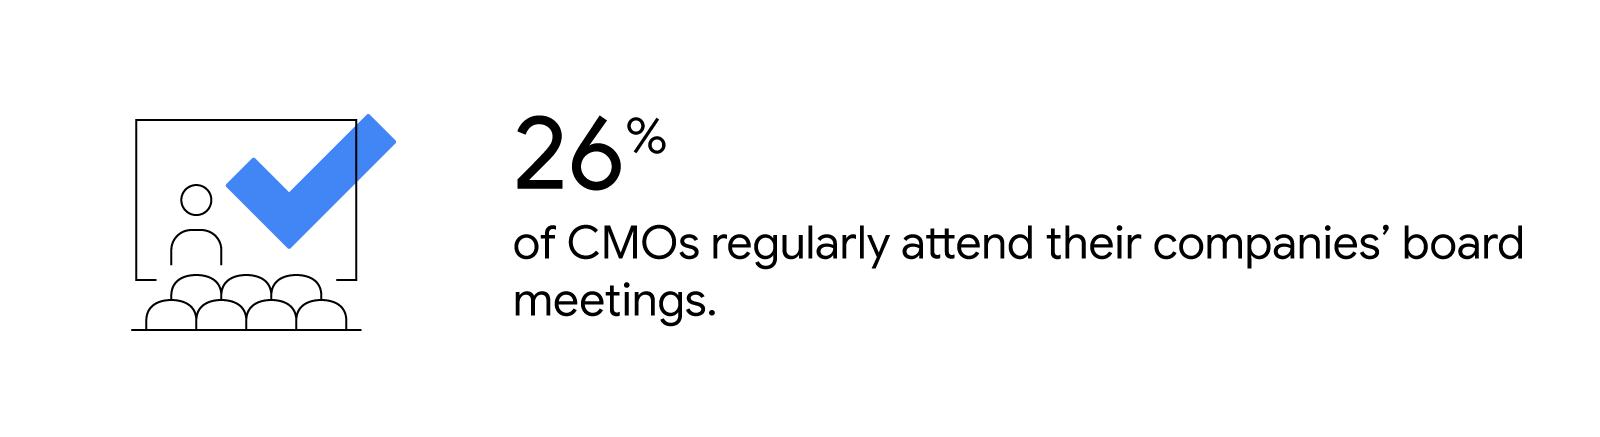 An illustration of a speaker in front of rows of seats and giving a formal presentation is accompanied by the stat: 26% of CMOs regularly attend their companies’ board meetings.